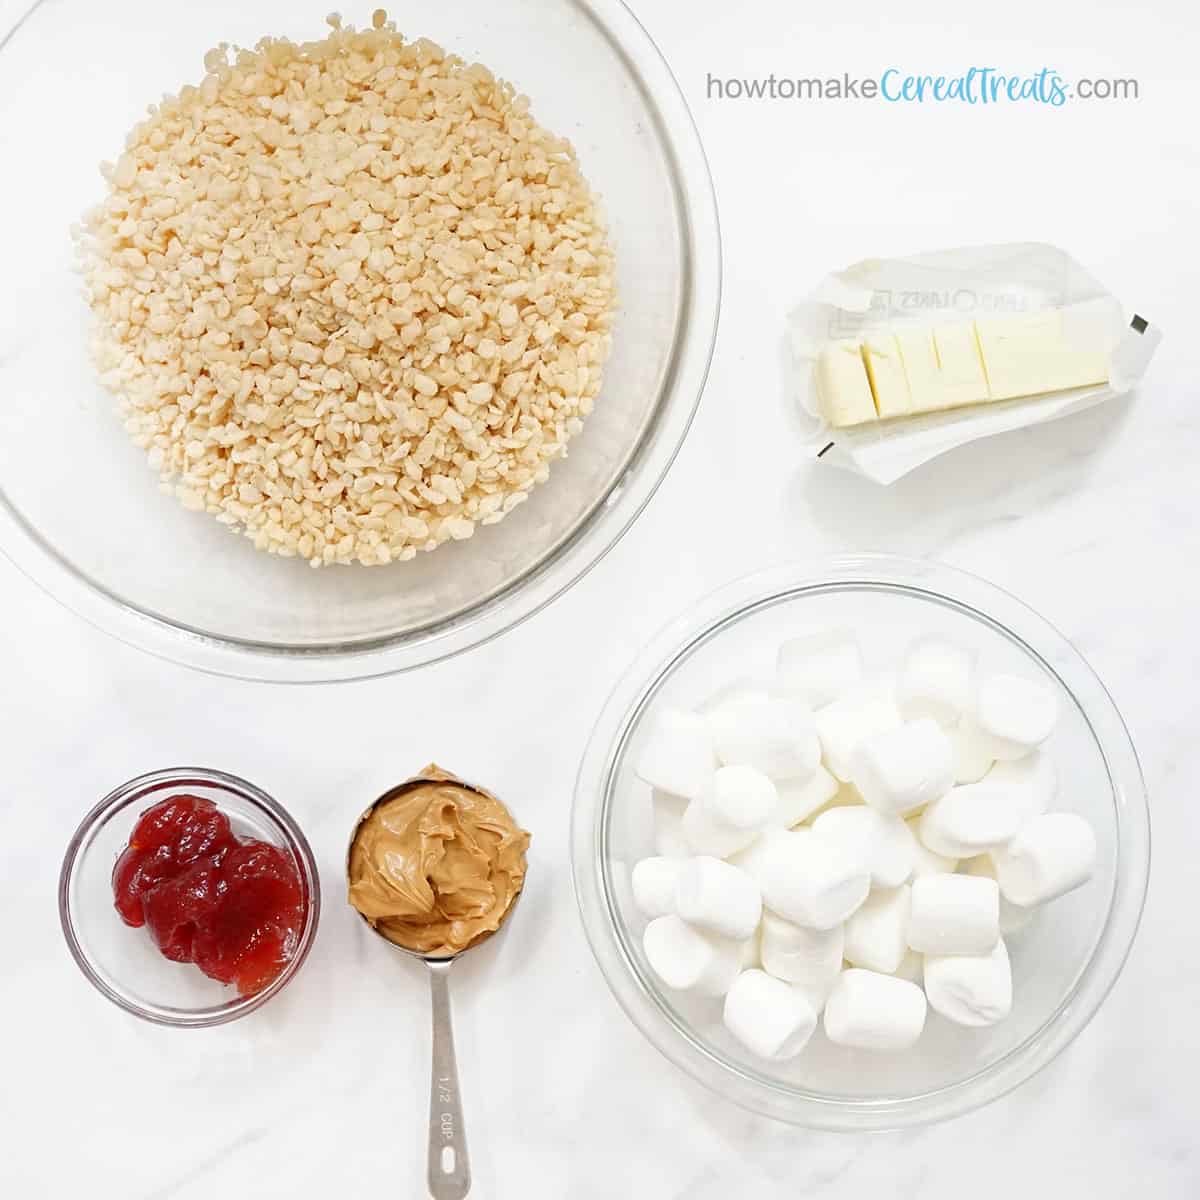 Rice krispies, marshmallows, butter, peanut butter, and jelly